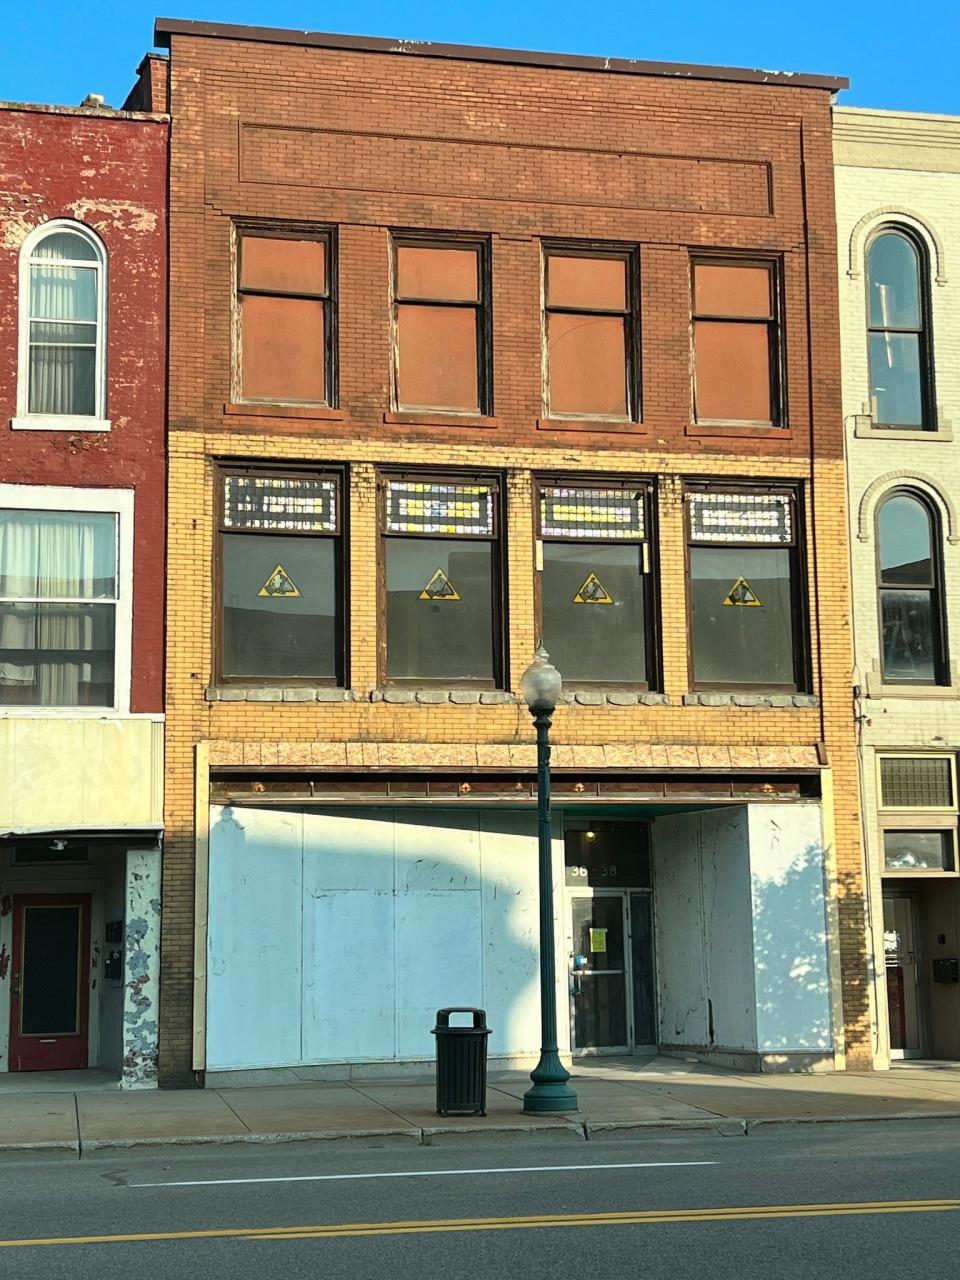 The old Monroe Optical Building with entrances at 36-38 S. Monroe St. and 13 W. Front St. is under renovation after sitting vacant for decades. The city of Monroe's Downtown Development Authority purchased the building for $90,000 earlier this year and expects to invest more than half a million to prepare the site for redevelopment.